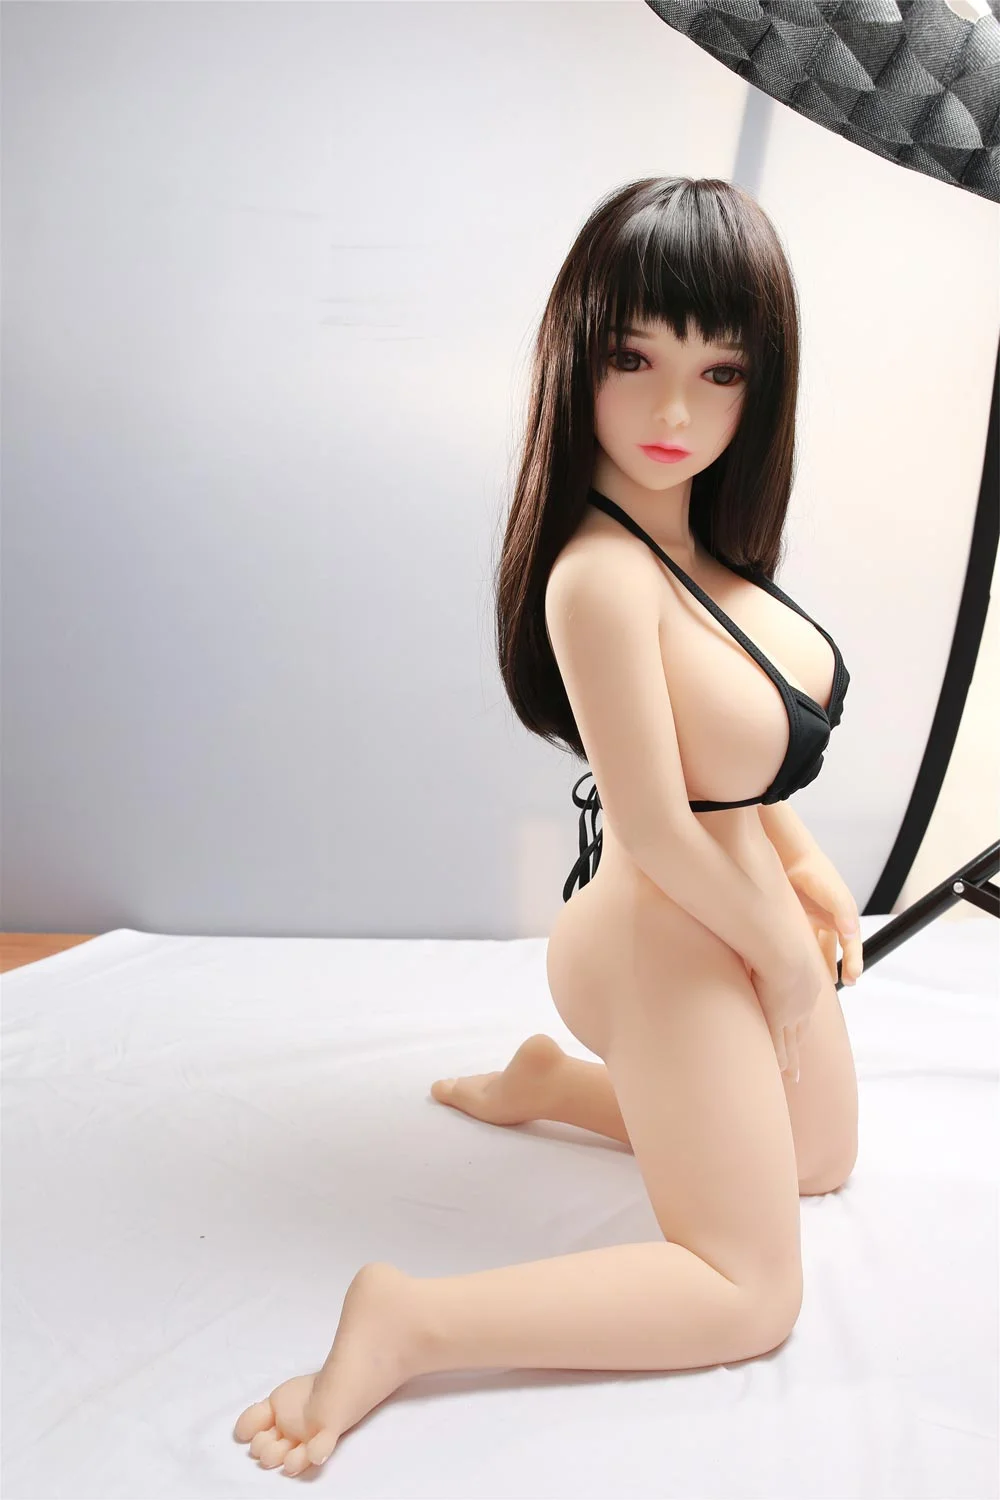 Mini sex doll with legs kneeling on the ground and touching vagina